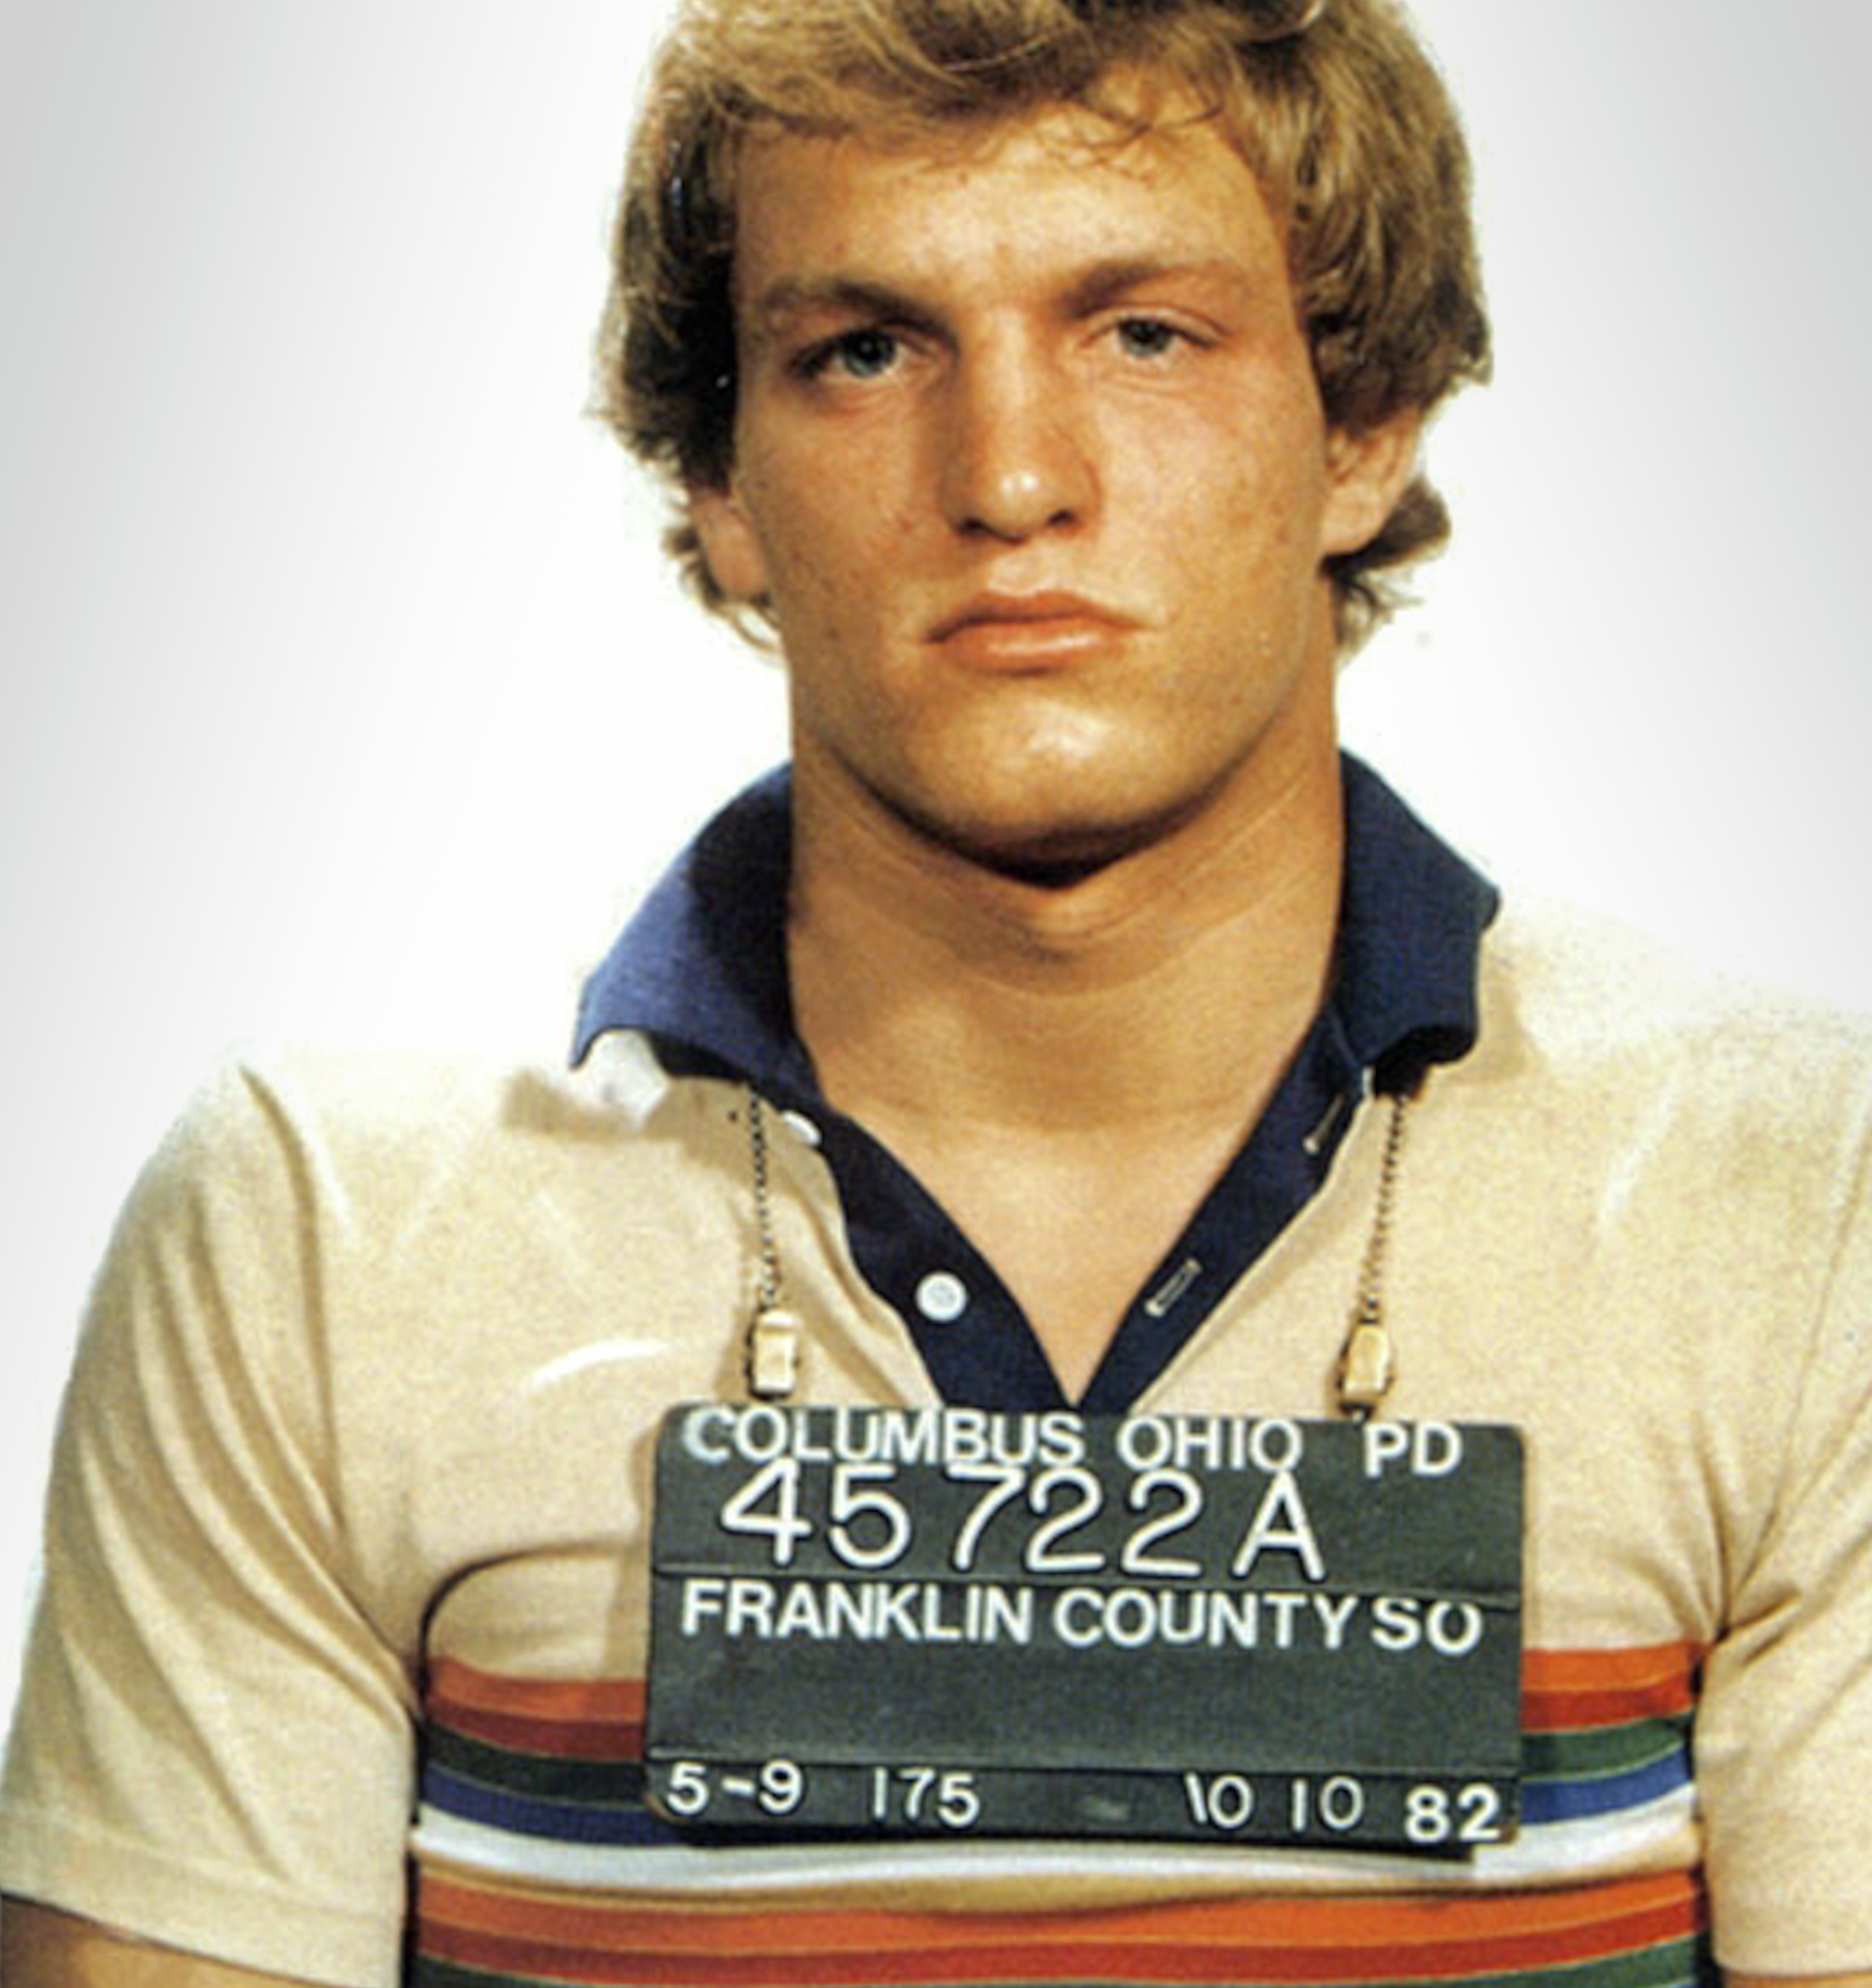 This handout depicts American actor and playwright Woody Harrelson in a mug shot taken after his arrest for disturbing the peace in Columbus, Ohio, in October 1982. | Source: Getty Images